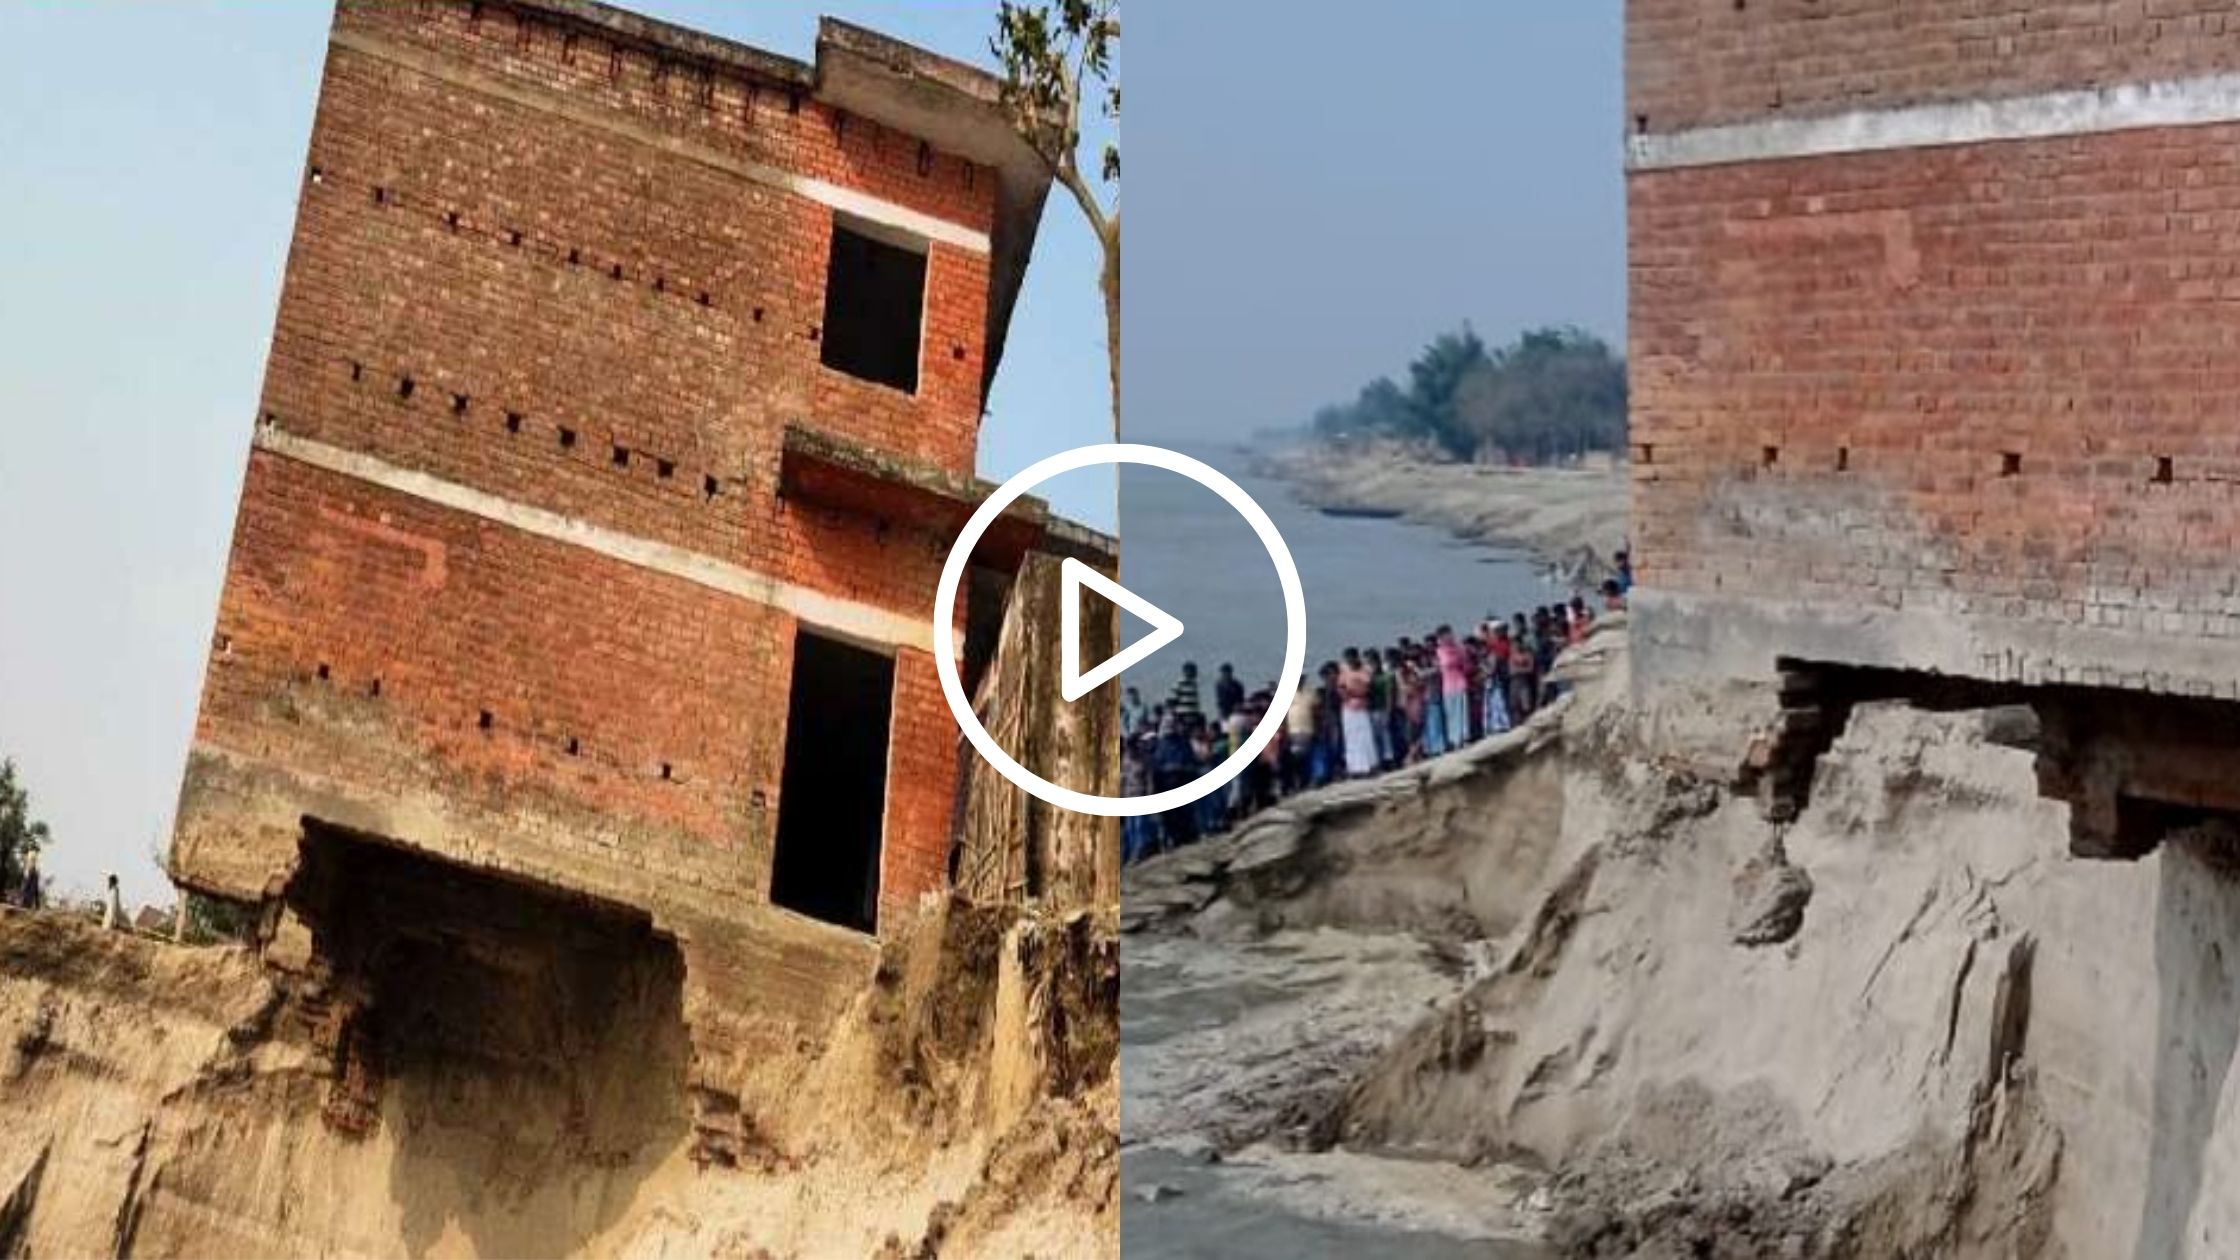 Utkramit middle school of Katihar in Bihar got immersed in the Ganges in an instant